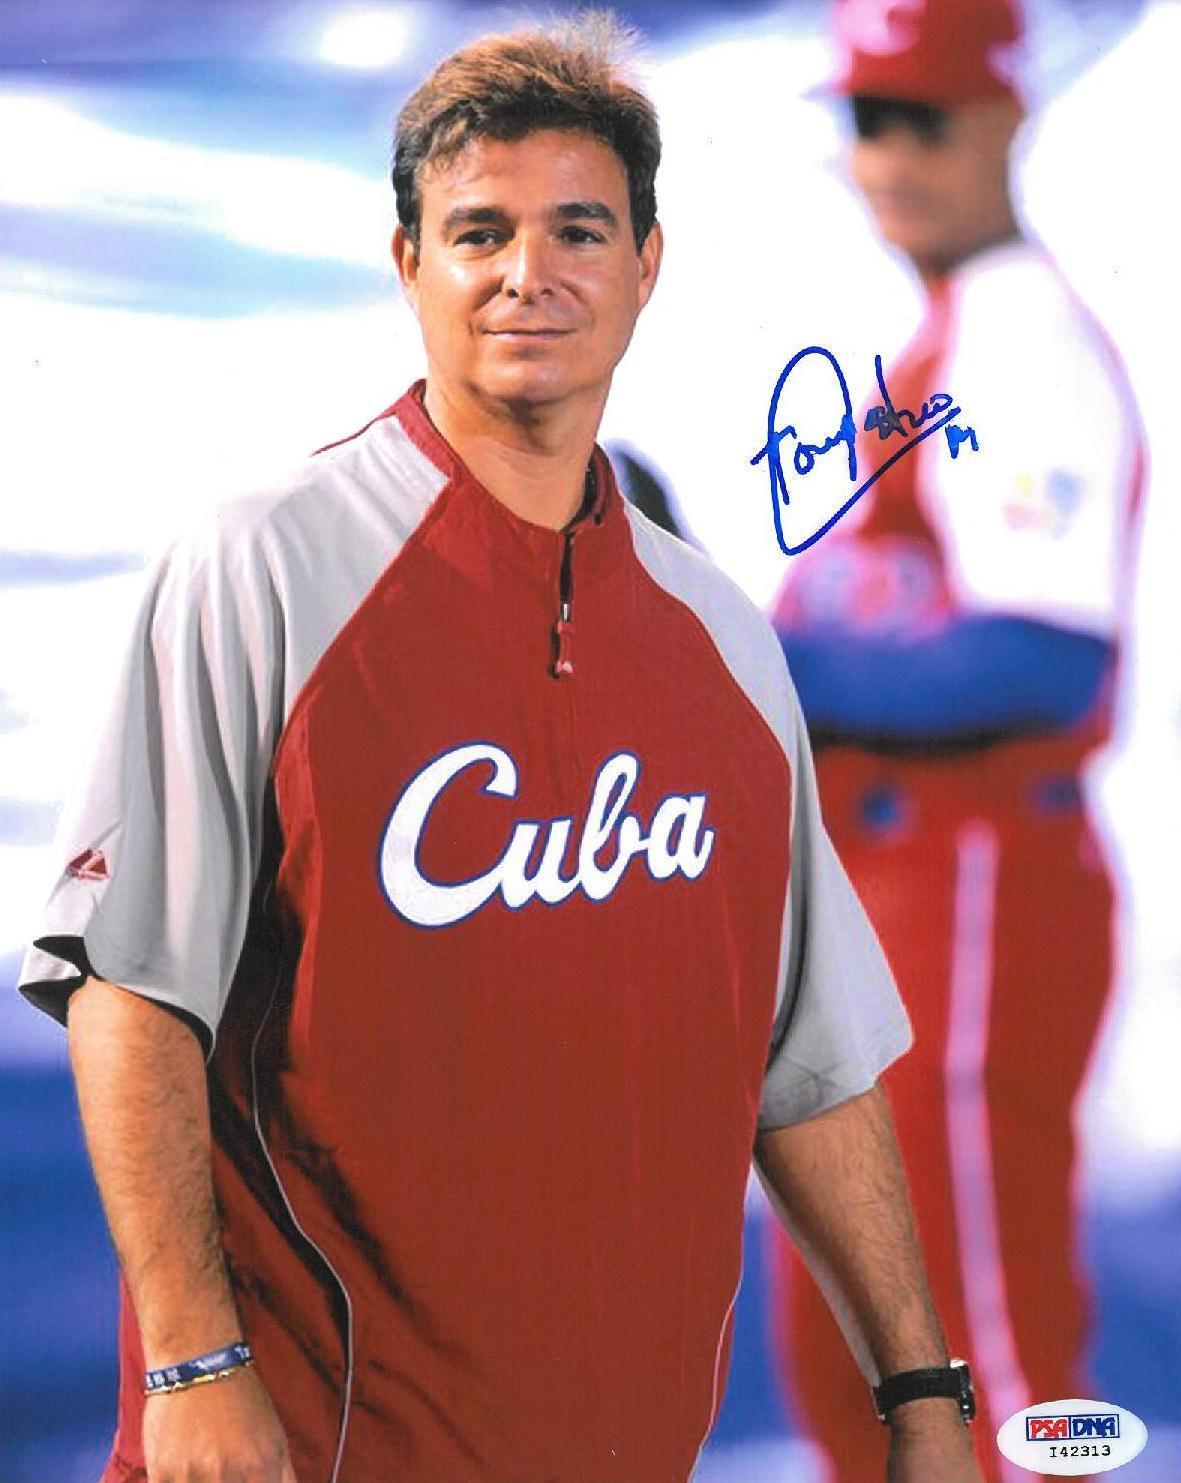 Anthony Castro Signed WBC Cuba Autographed 8x10 Photo Poster painting (PSA/DNA) #I42313